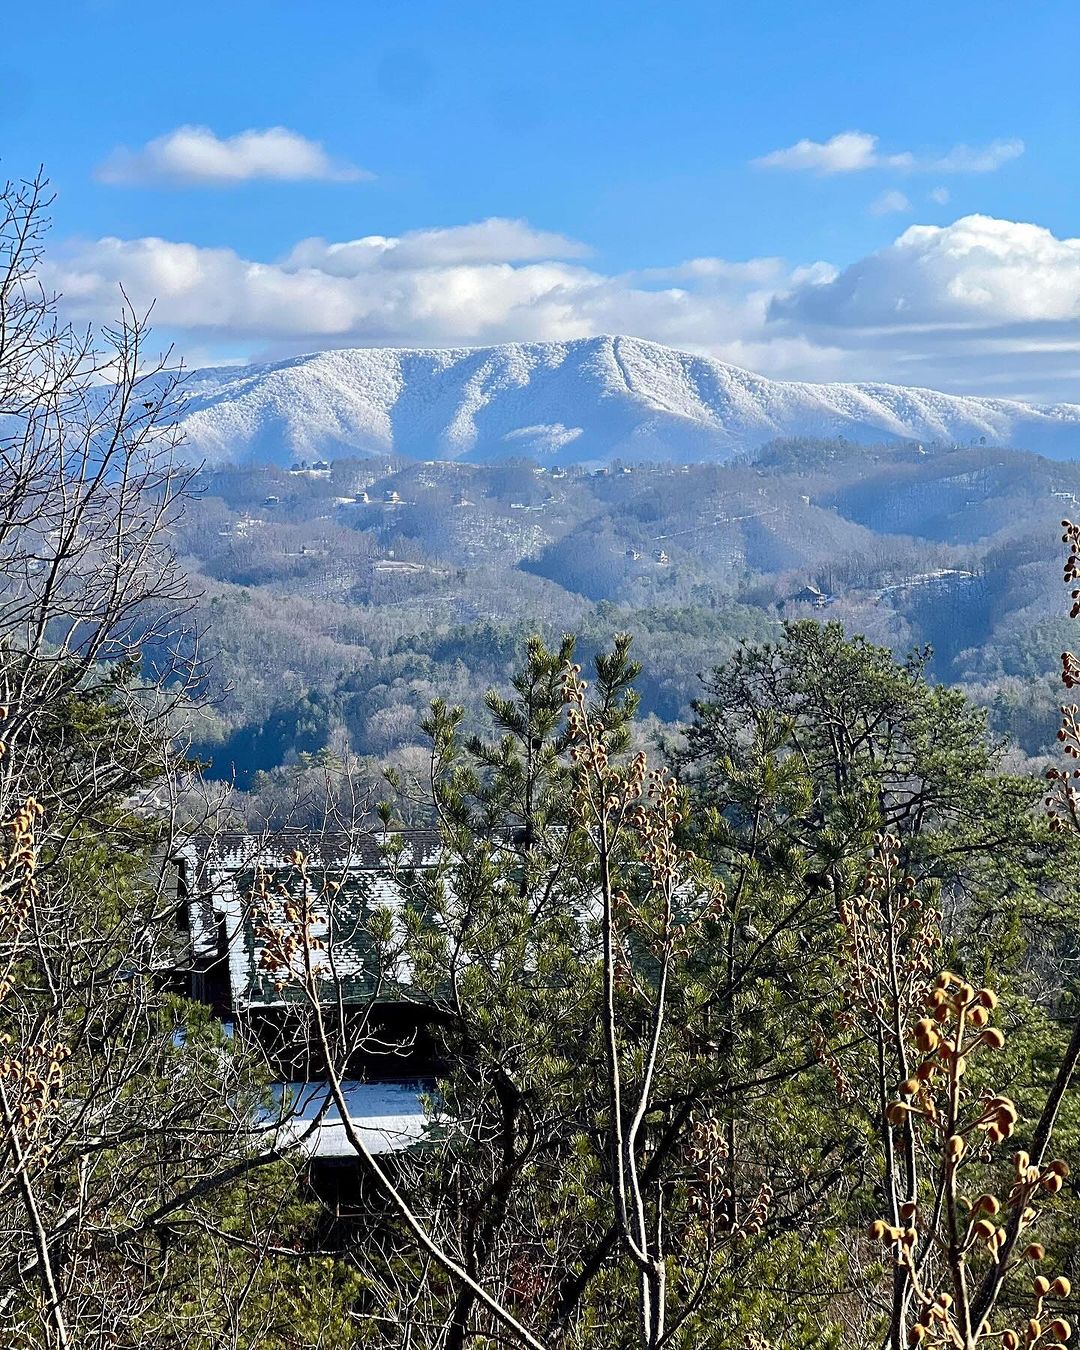 5 Reasons Why Sevierville Should Be Your Summer Escape Destination